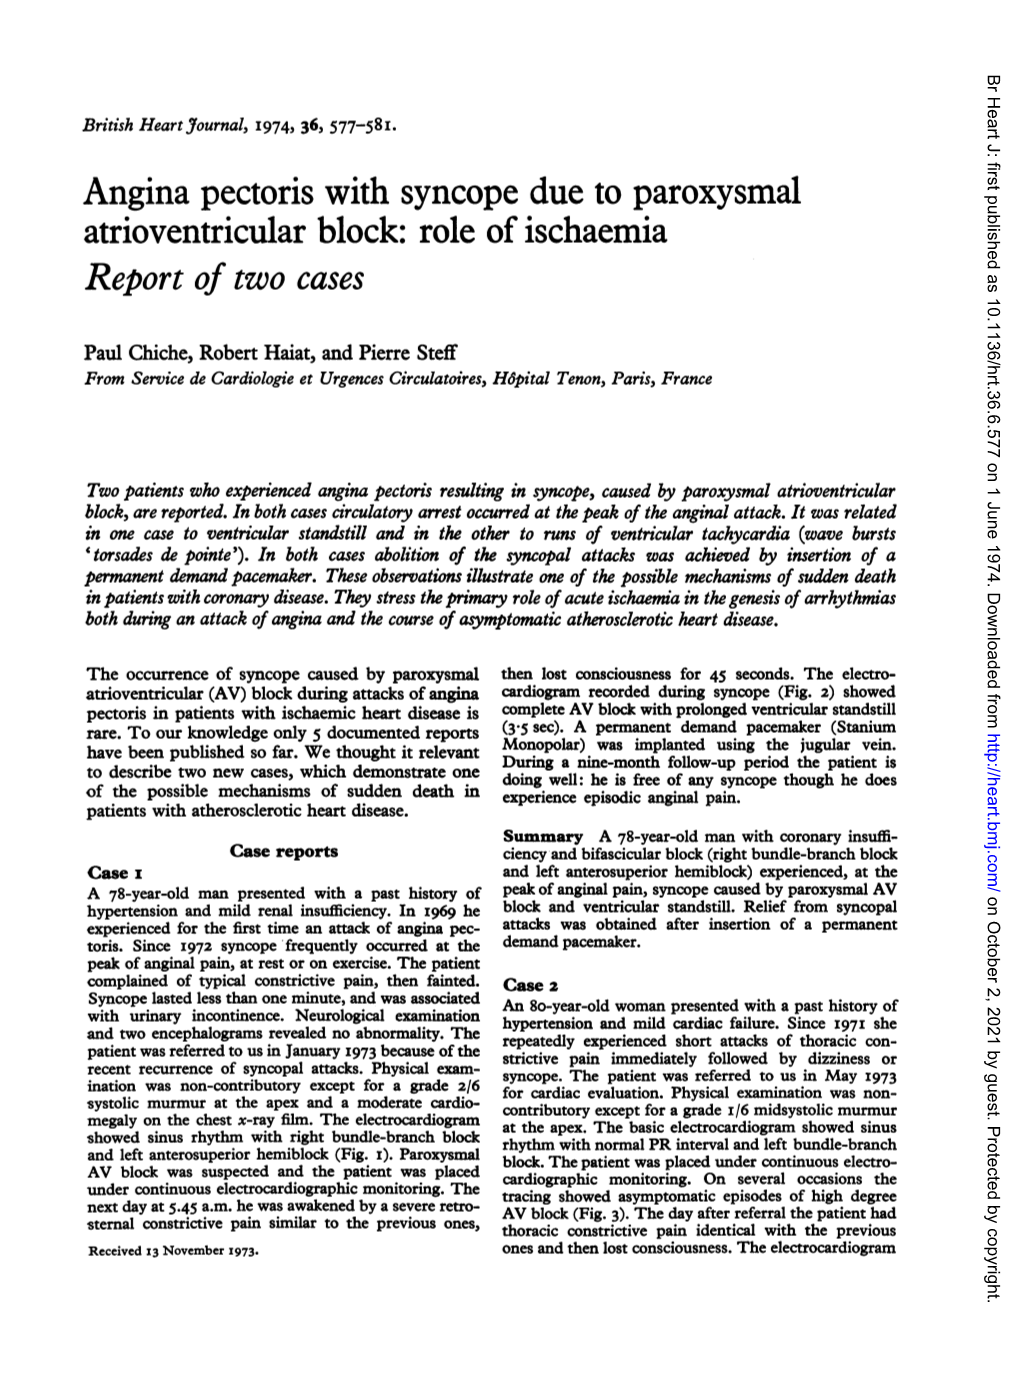 Angina Pectoris with Syncope Due to Paroxysmal Atrioventricular Block: Role of Ischaemia Report of Two Cases